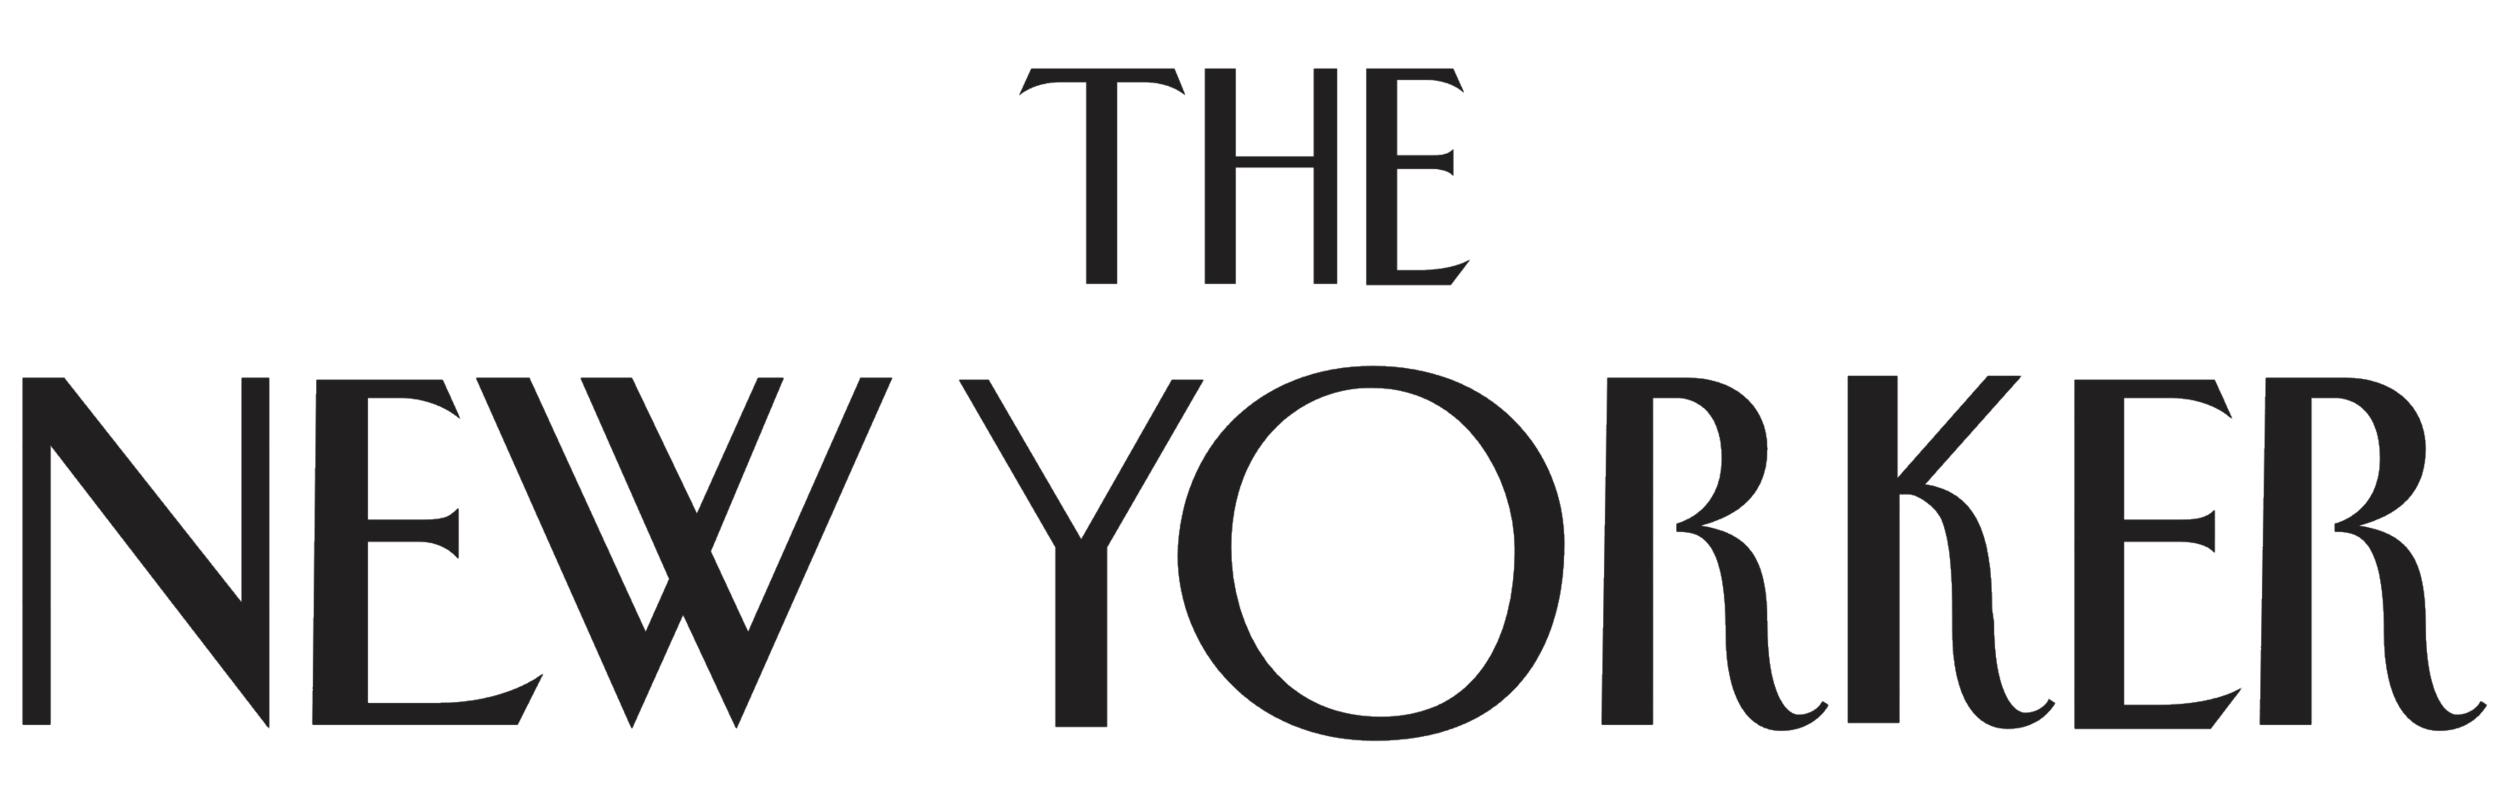 The_New_Yorker_logo-1.png